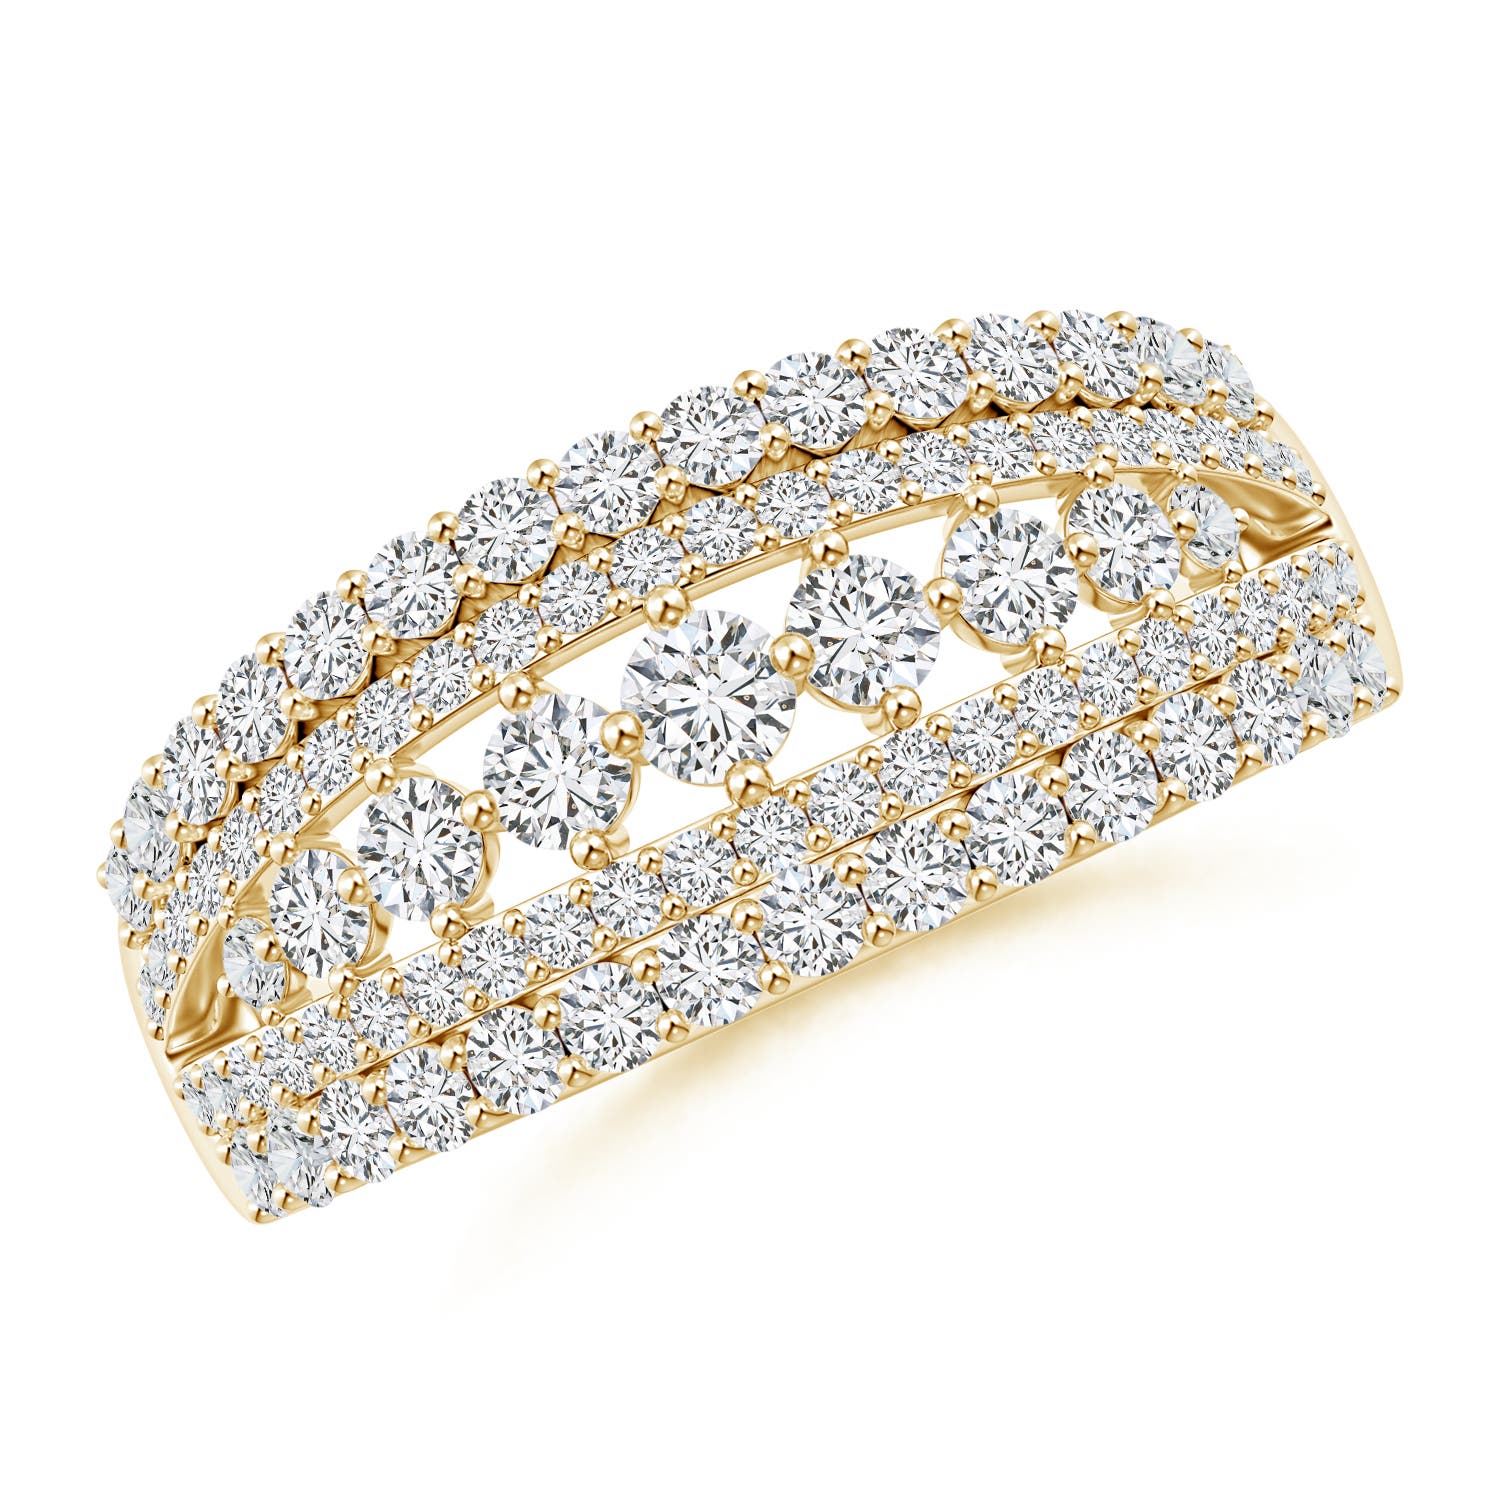 H, SI2 / 1.75 CT / 14 KT Yellow Gold